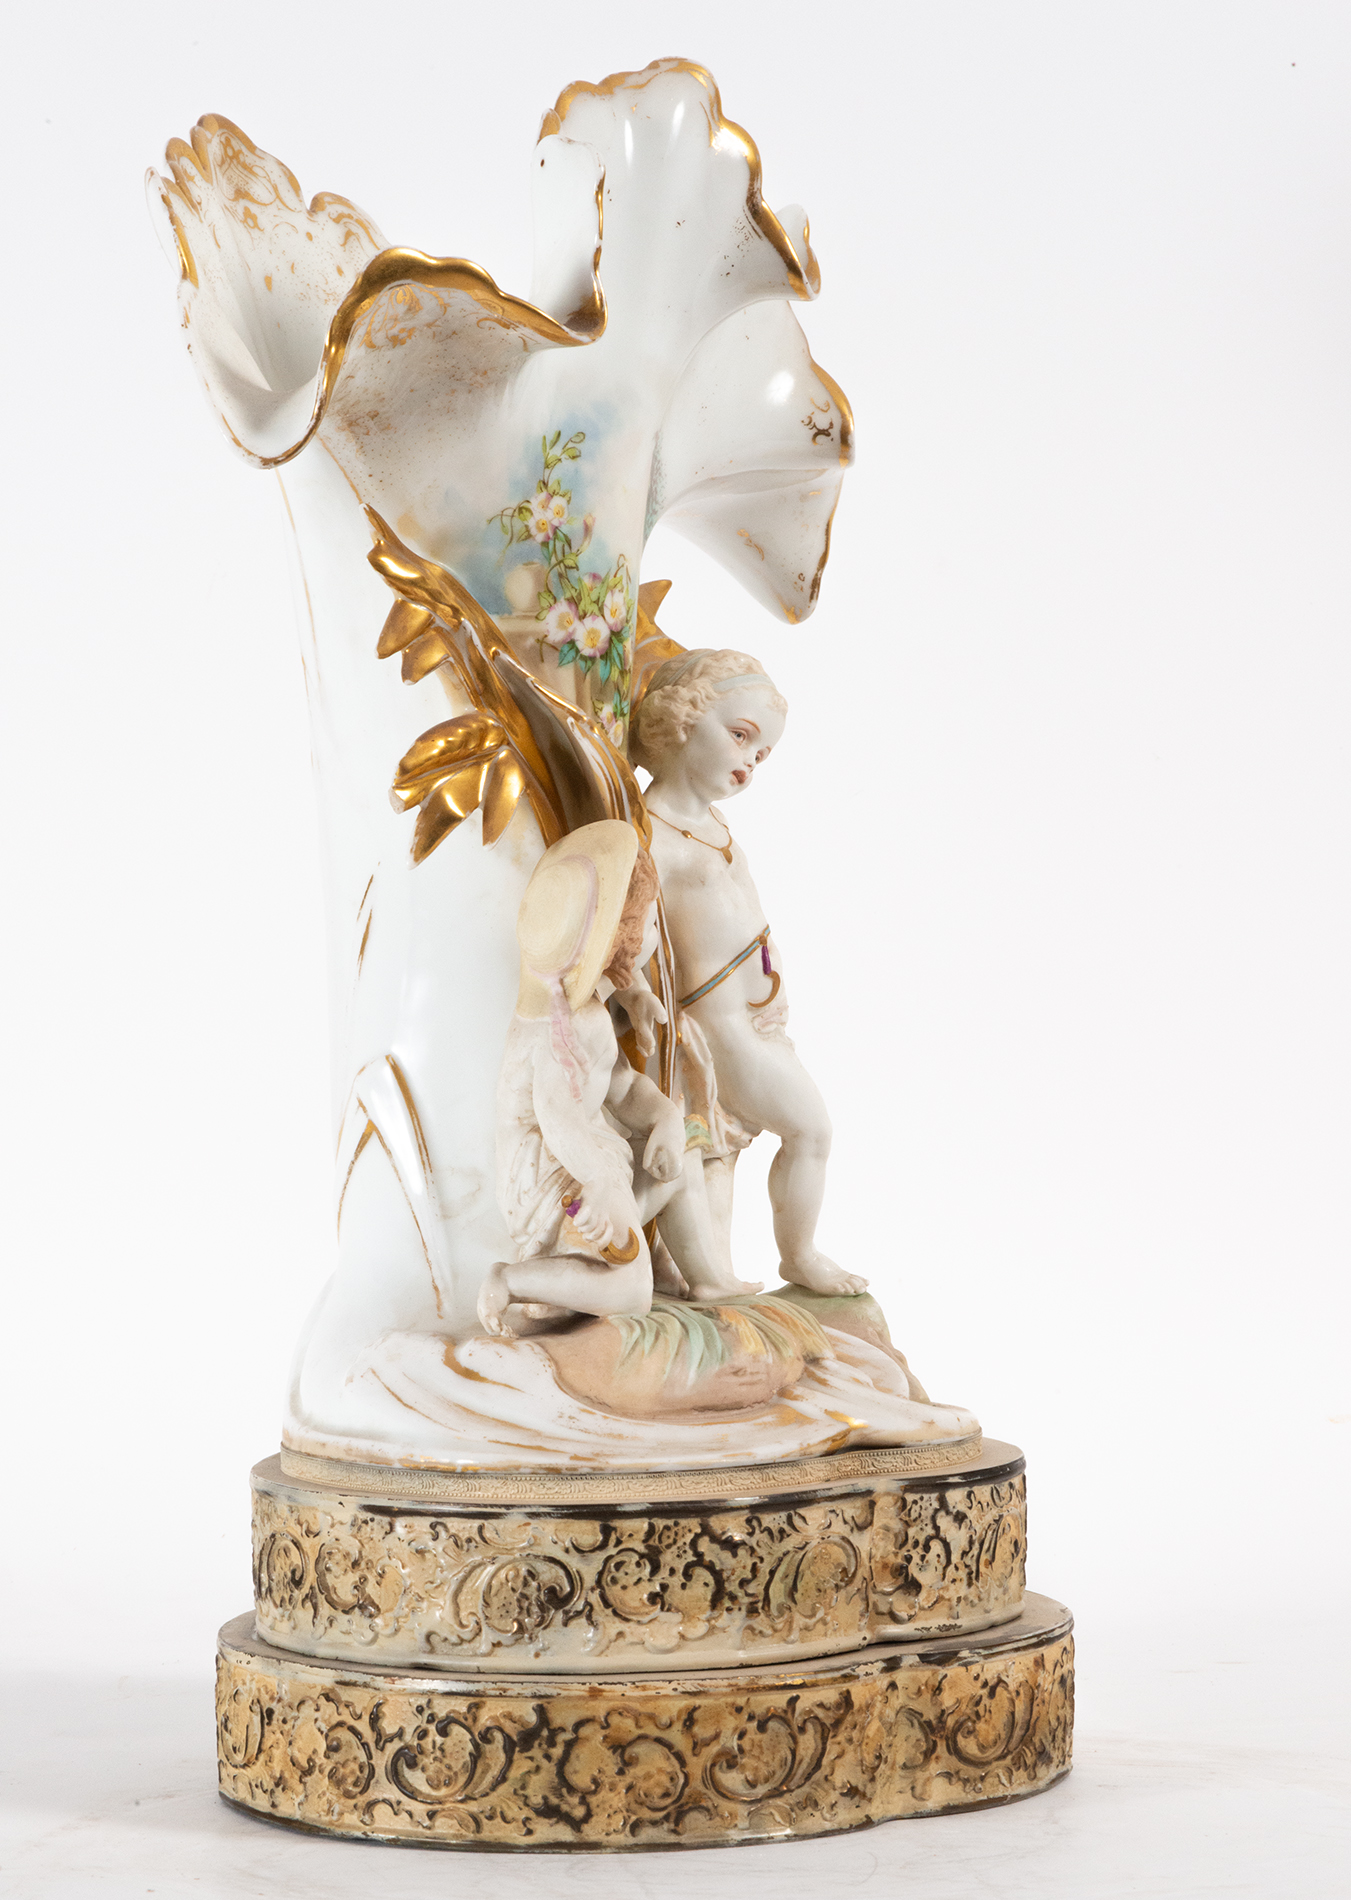 Pair of Vases with Little Shepherds in glazed biscuit porcelain, 19th century - Image 4 of 8